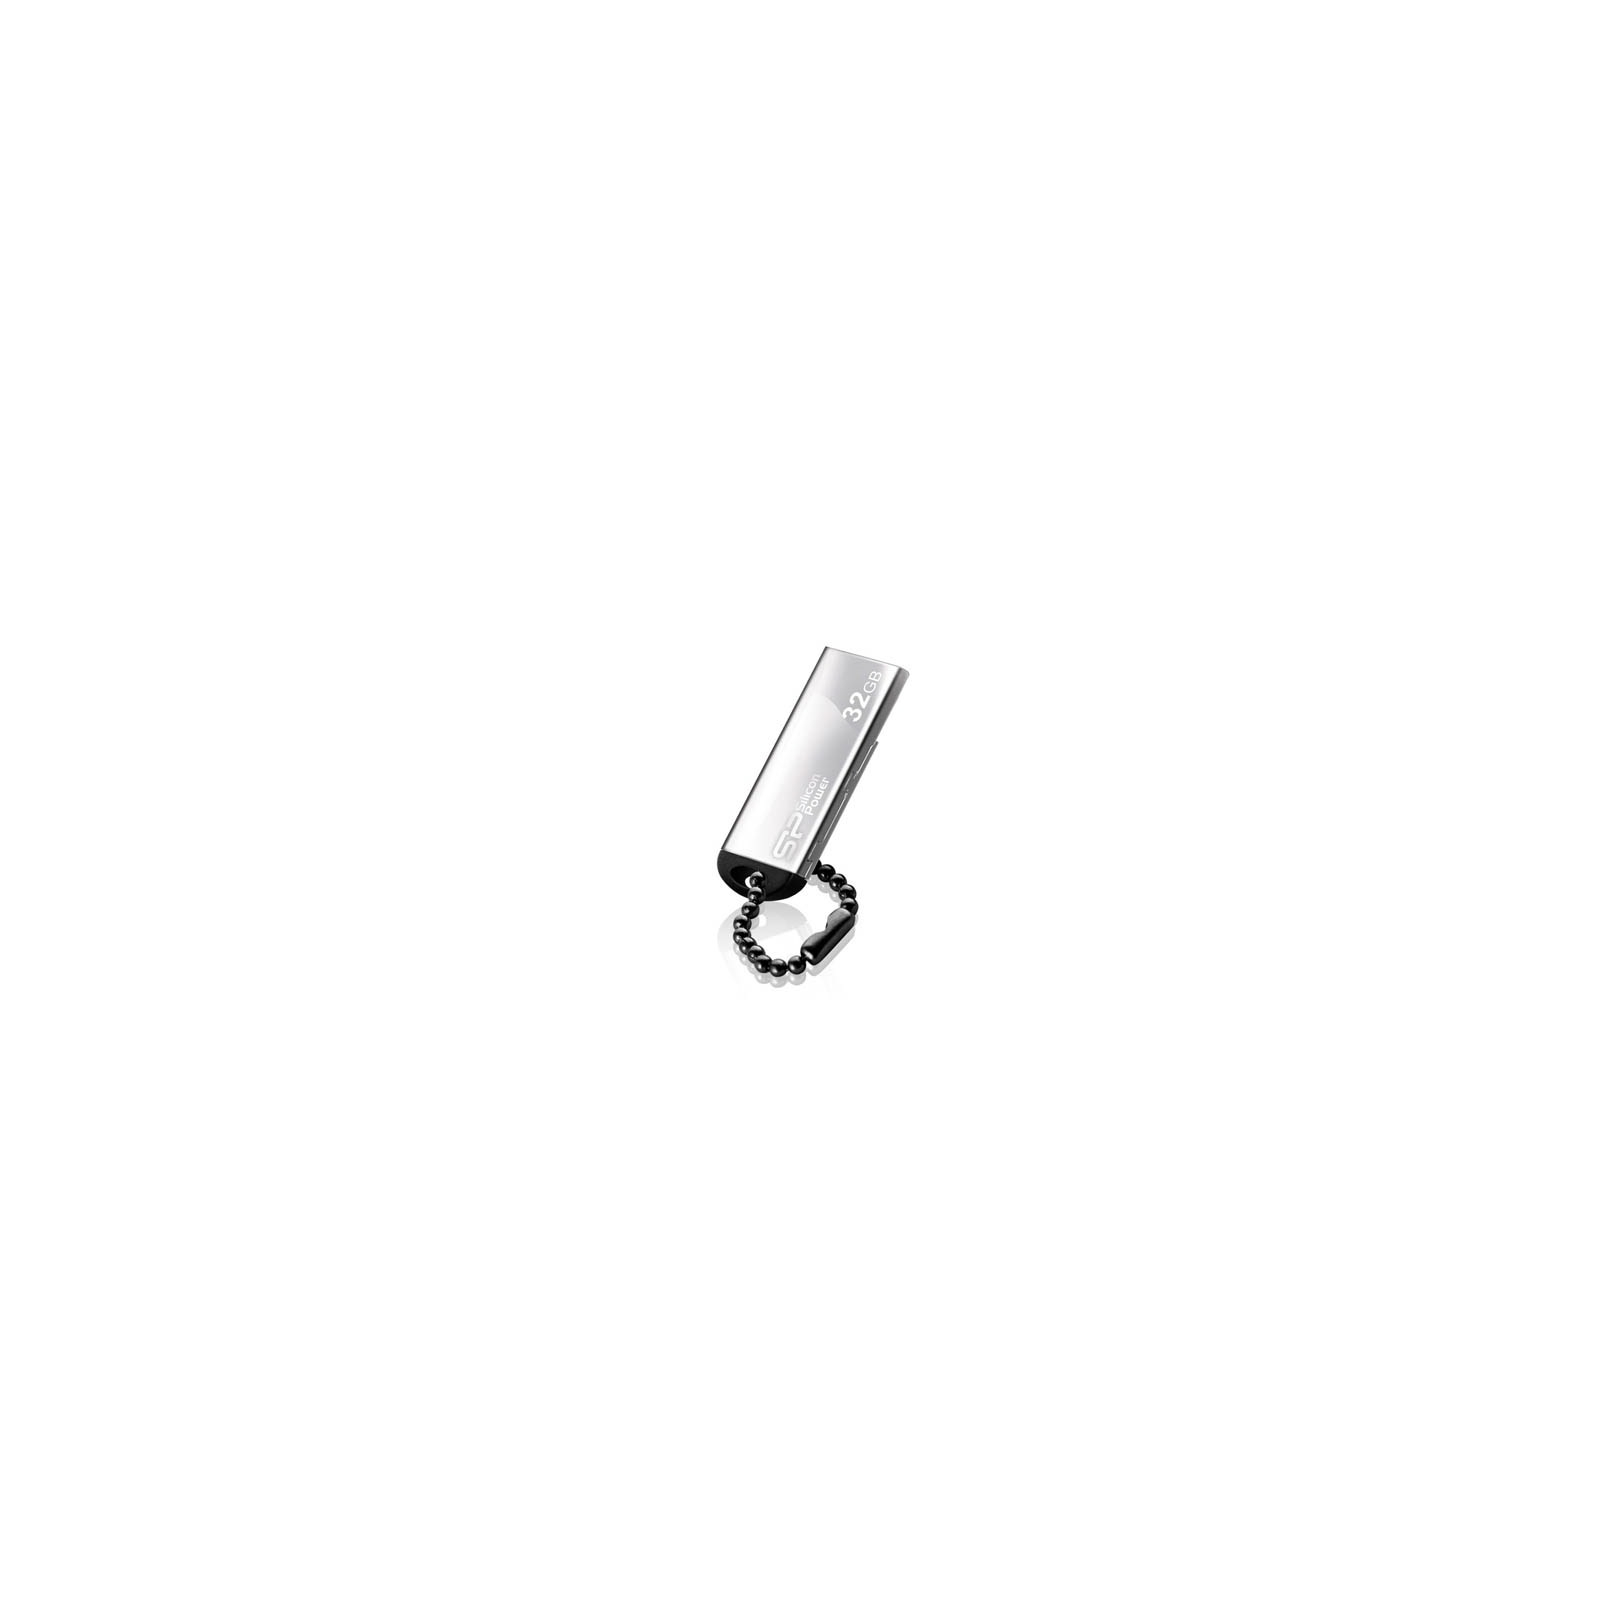 USB флеш накопичувач Silicon Power 32Gb Touch 830 silver (SP032GBUF2830V1S)